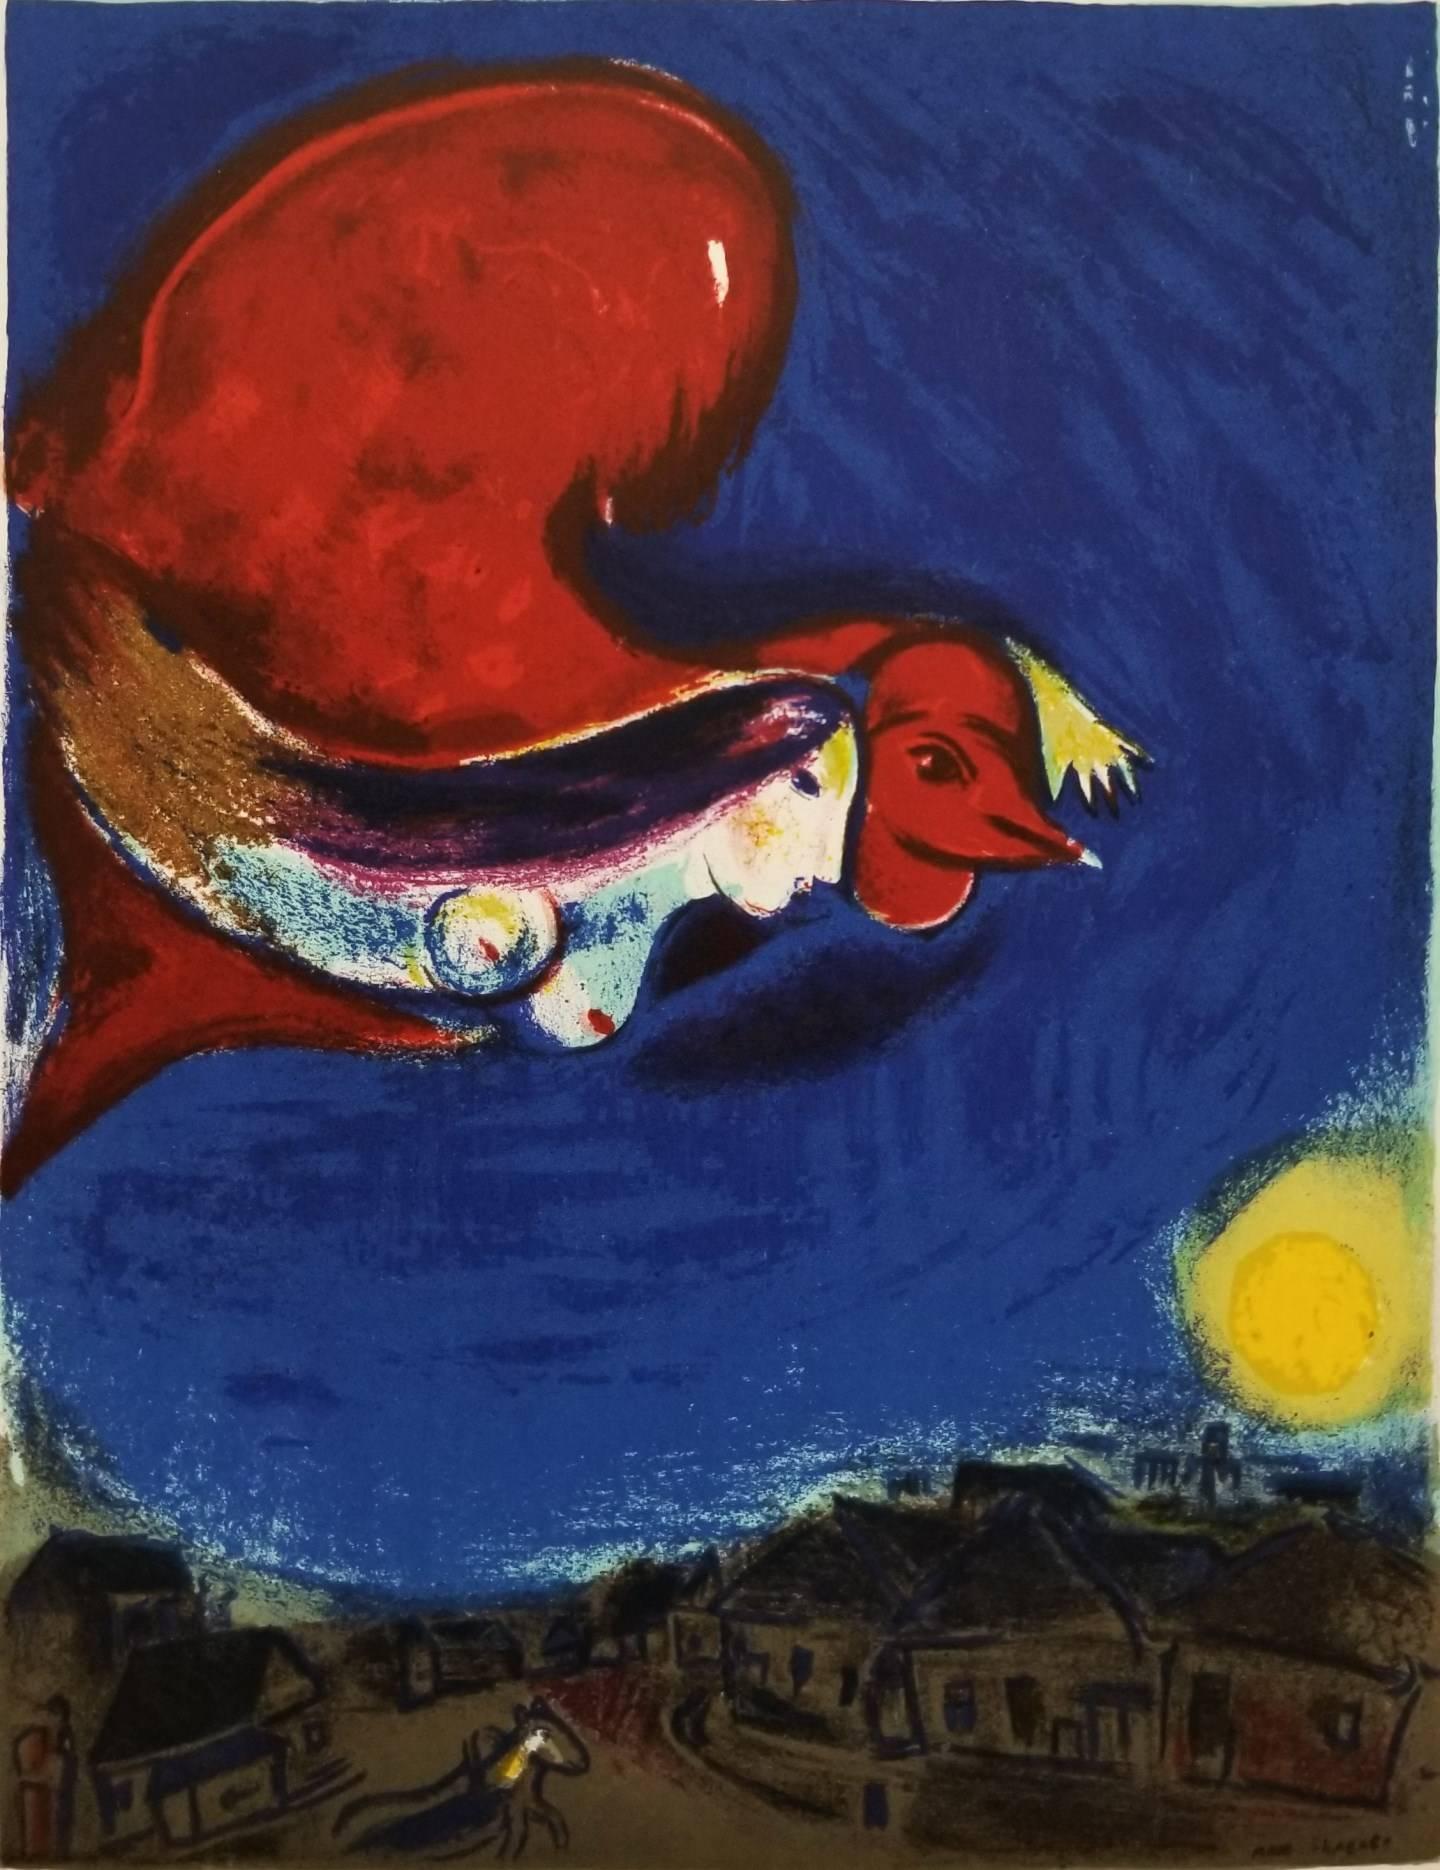 The Village by Night (front cover) - Print by Marc Chagall